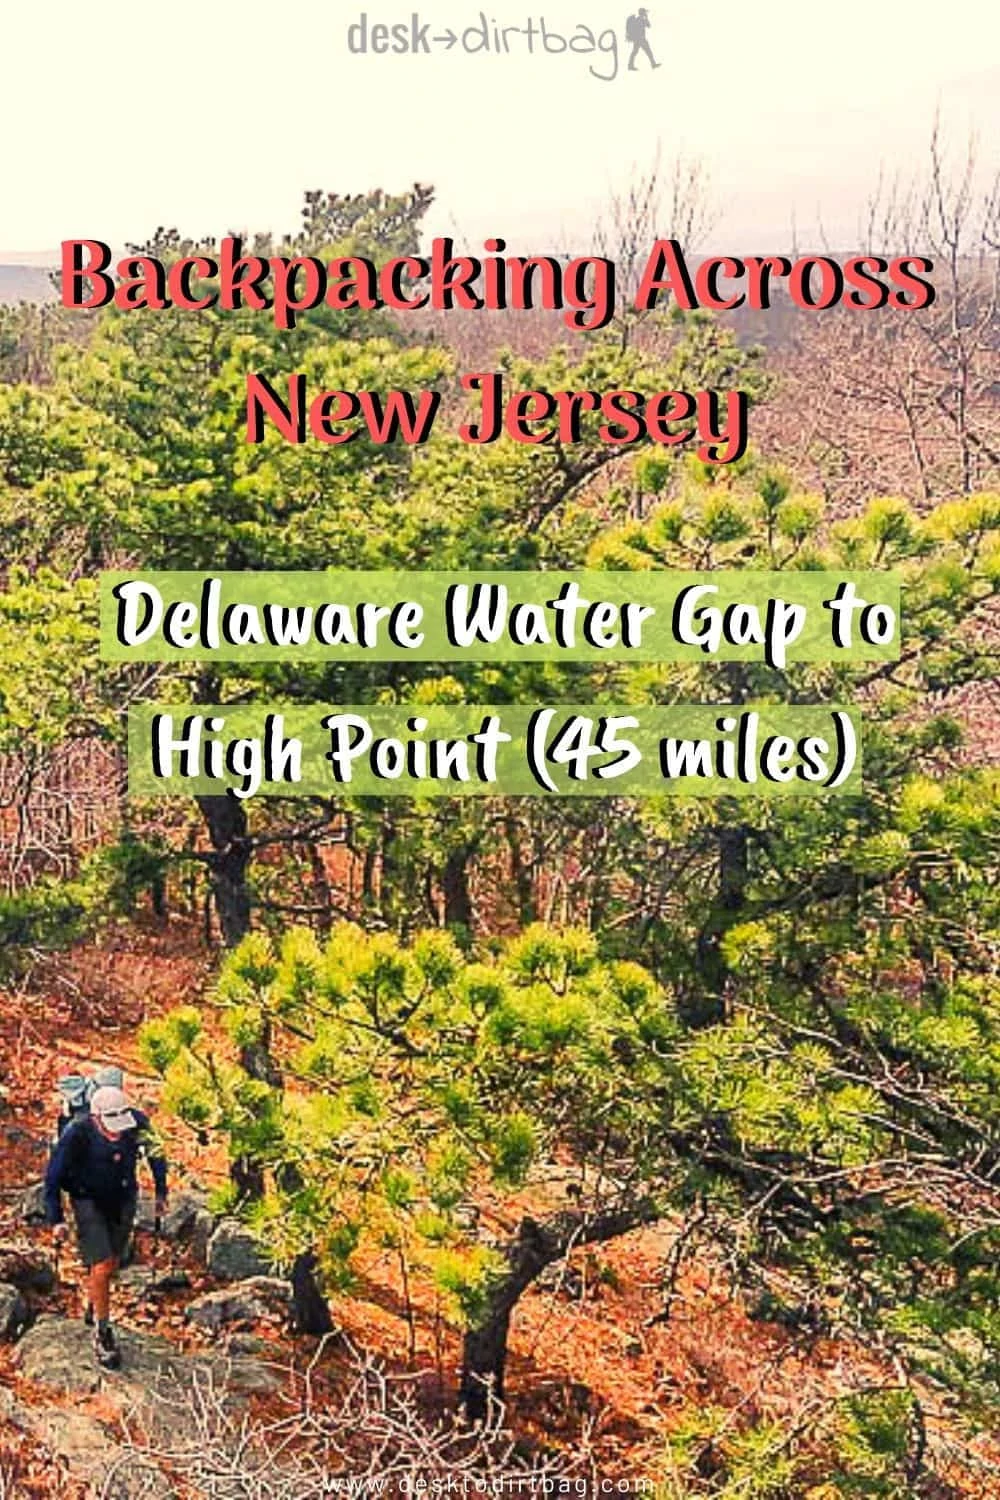 Backpacking Across New Jersey: Delaware Water Gap to High Point (45 miles) trip-reports, new-jersey, backpacking